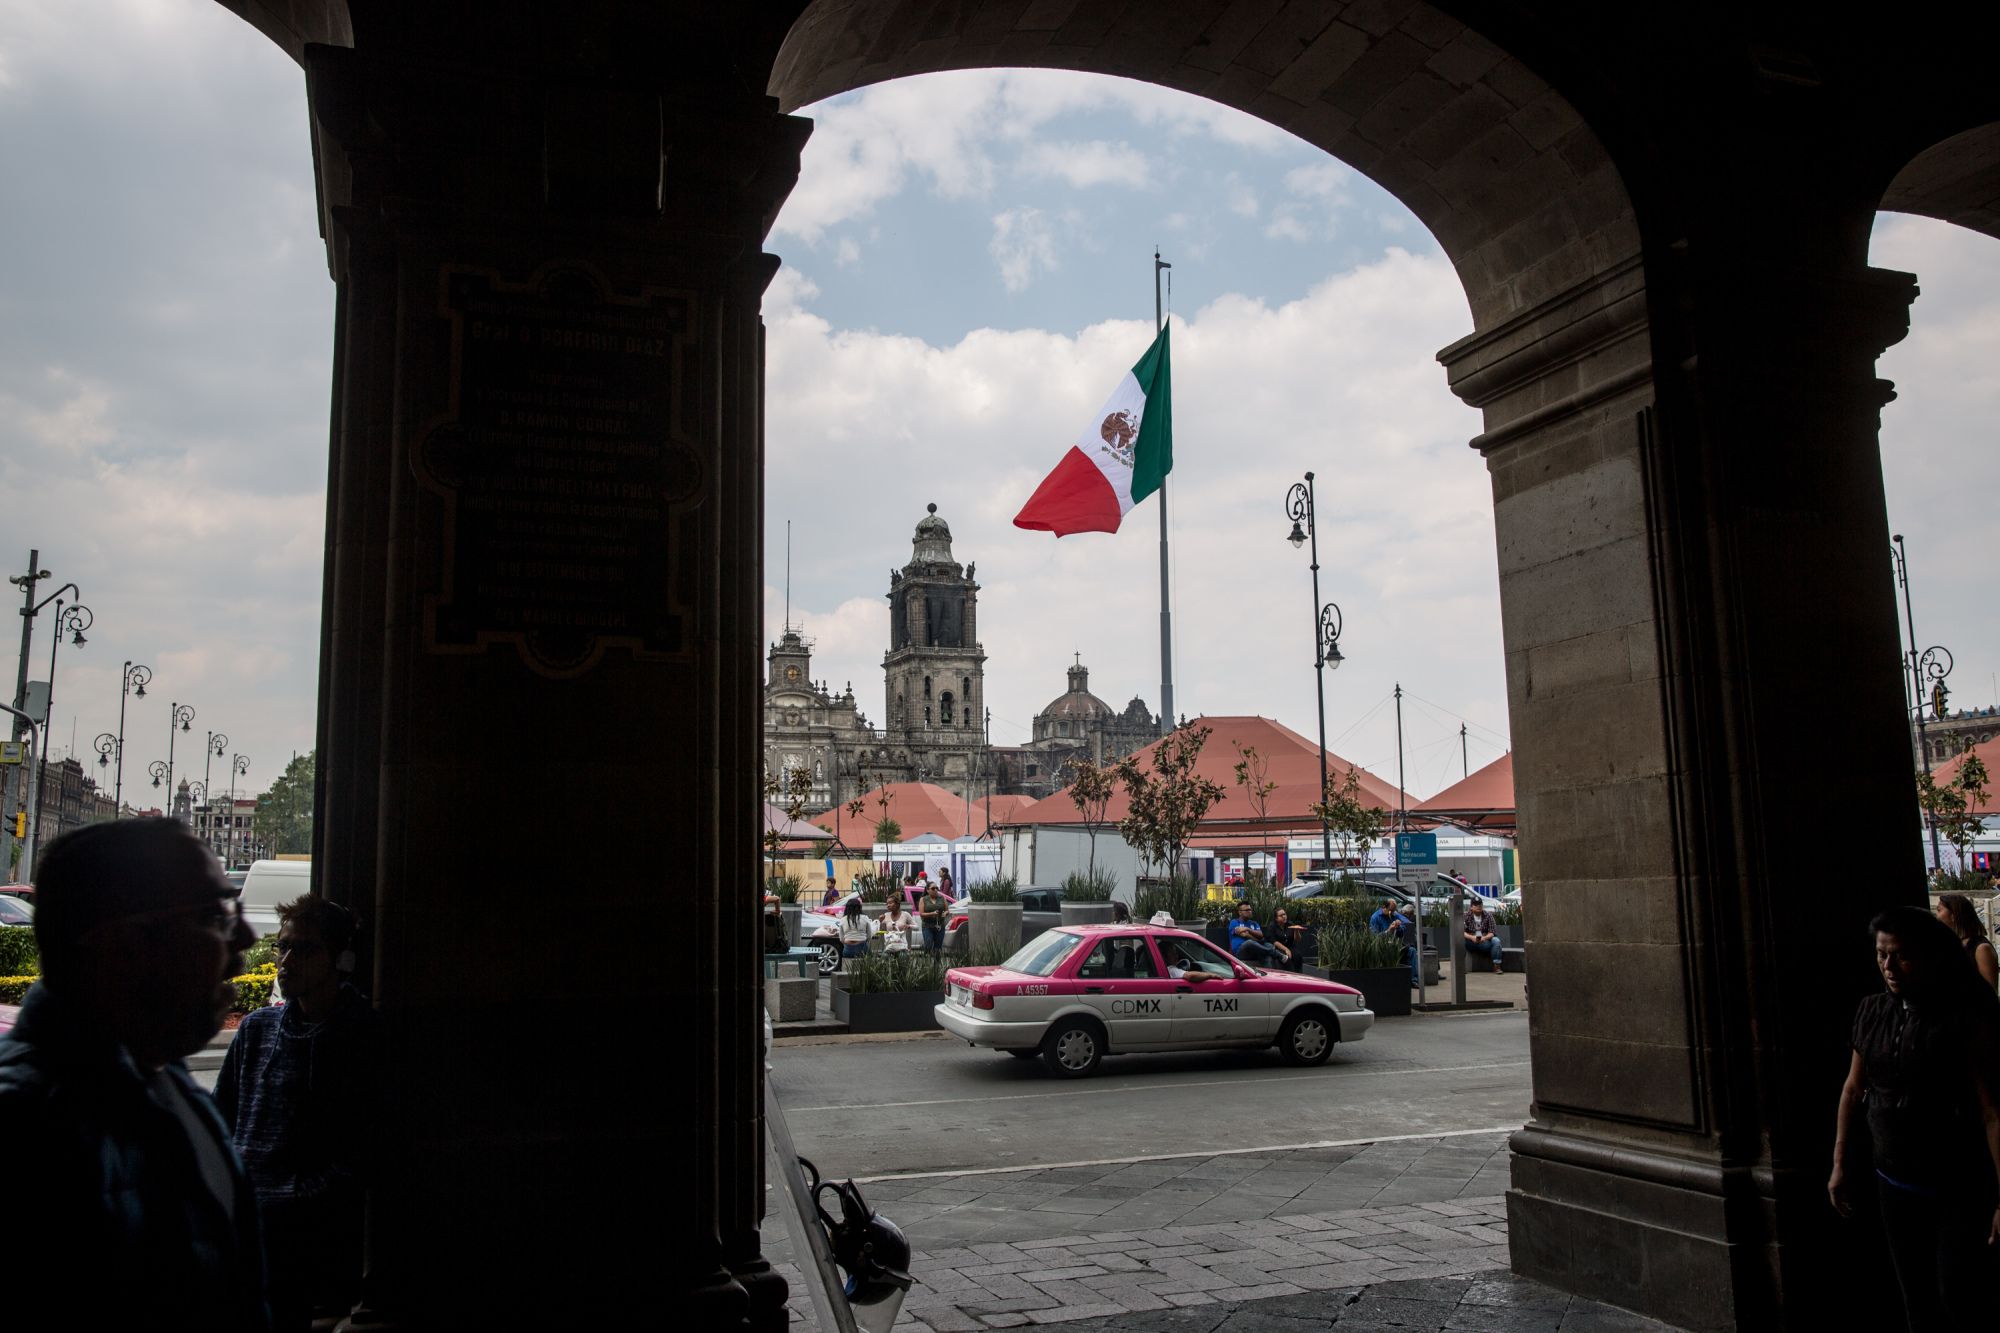 A taxi cab passes in front of the Mexican flag flying at the Plaza de la Constitucion (Zocalo) in Mexico City, Mexico, on Friday, April 13, 2018. Mexico's peso extended losses for a third day amid profit-taking outflows as the currency failed to stay strong past 18.00 key level. Photographer: Alejandro Cegarra/Bloomberg